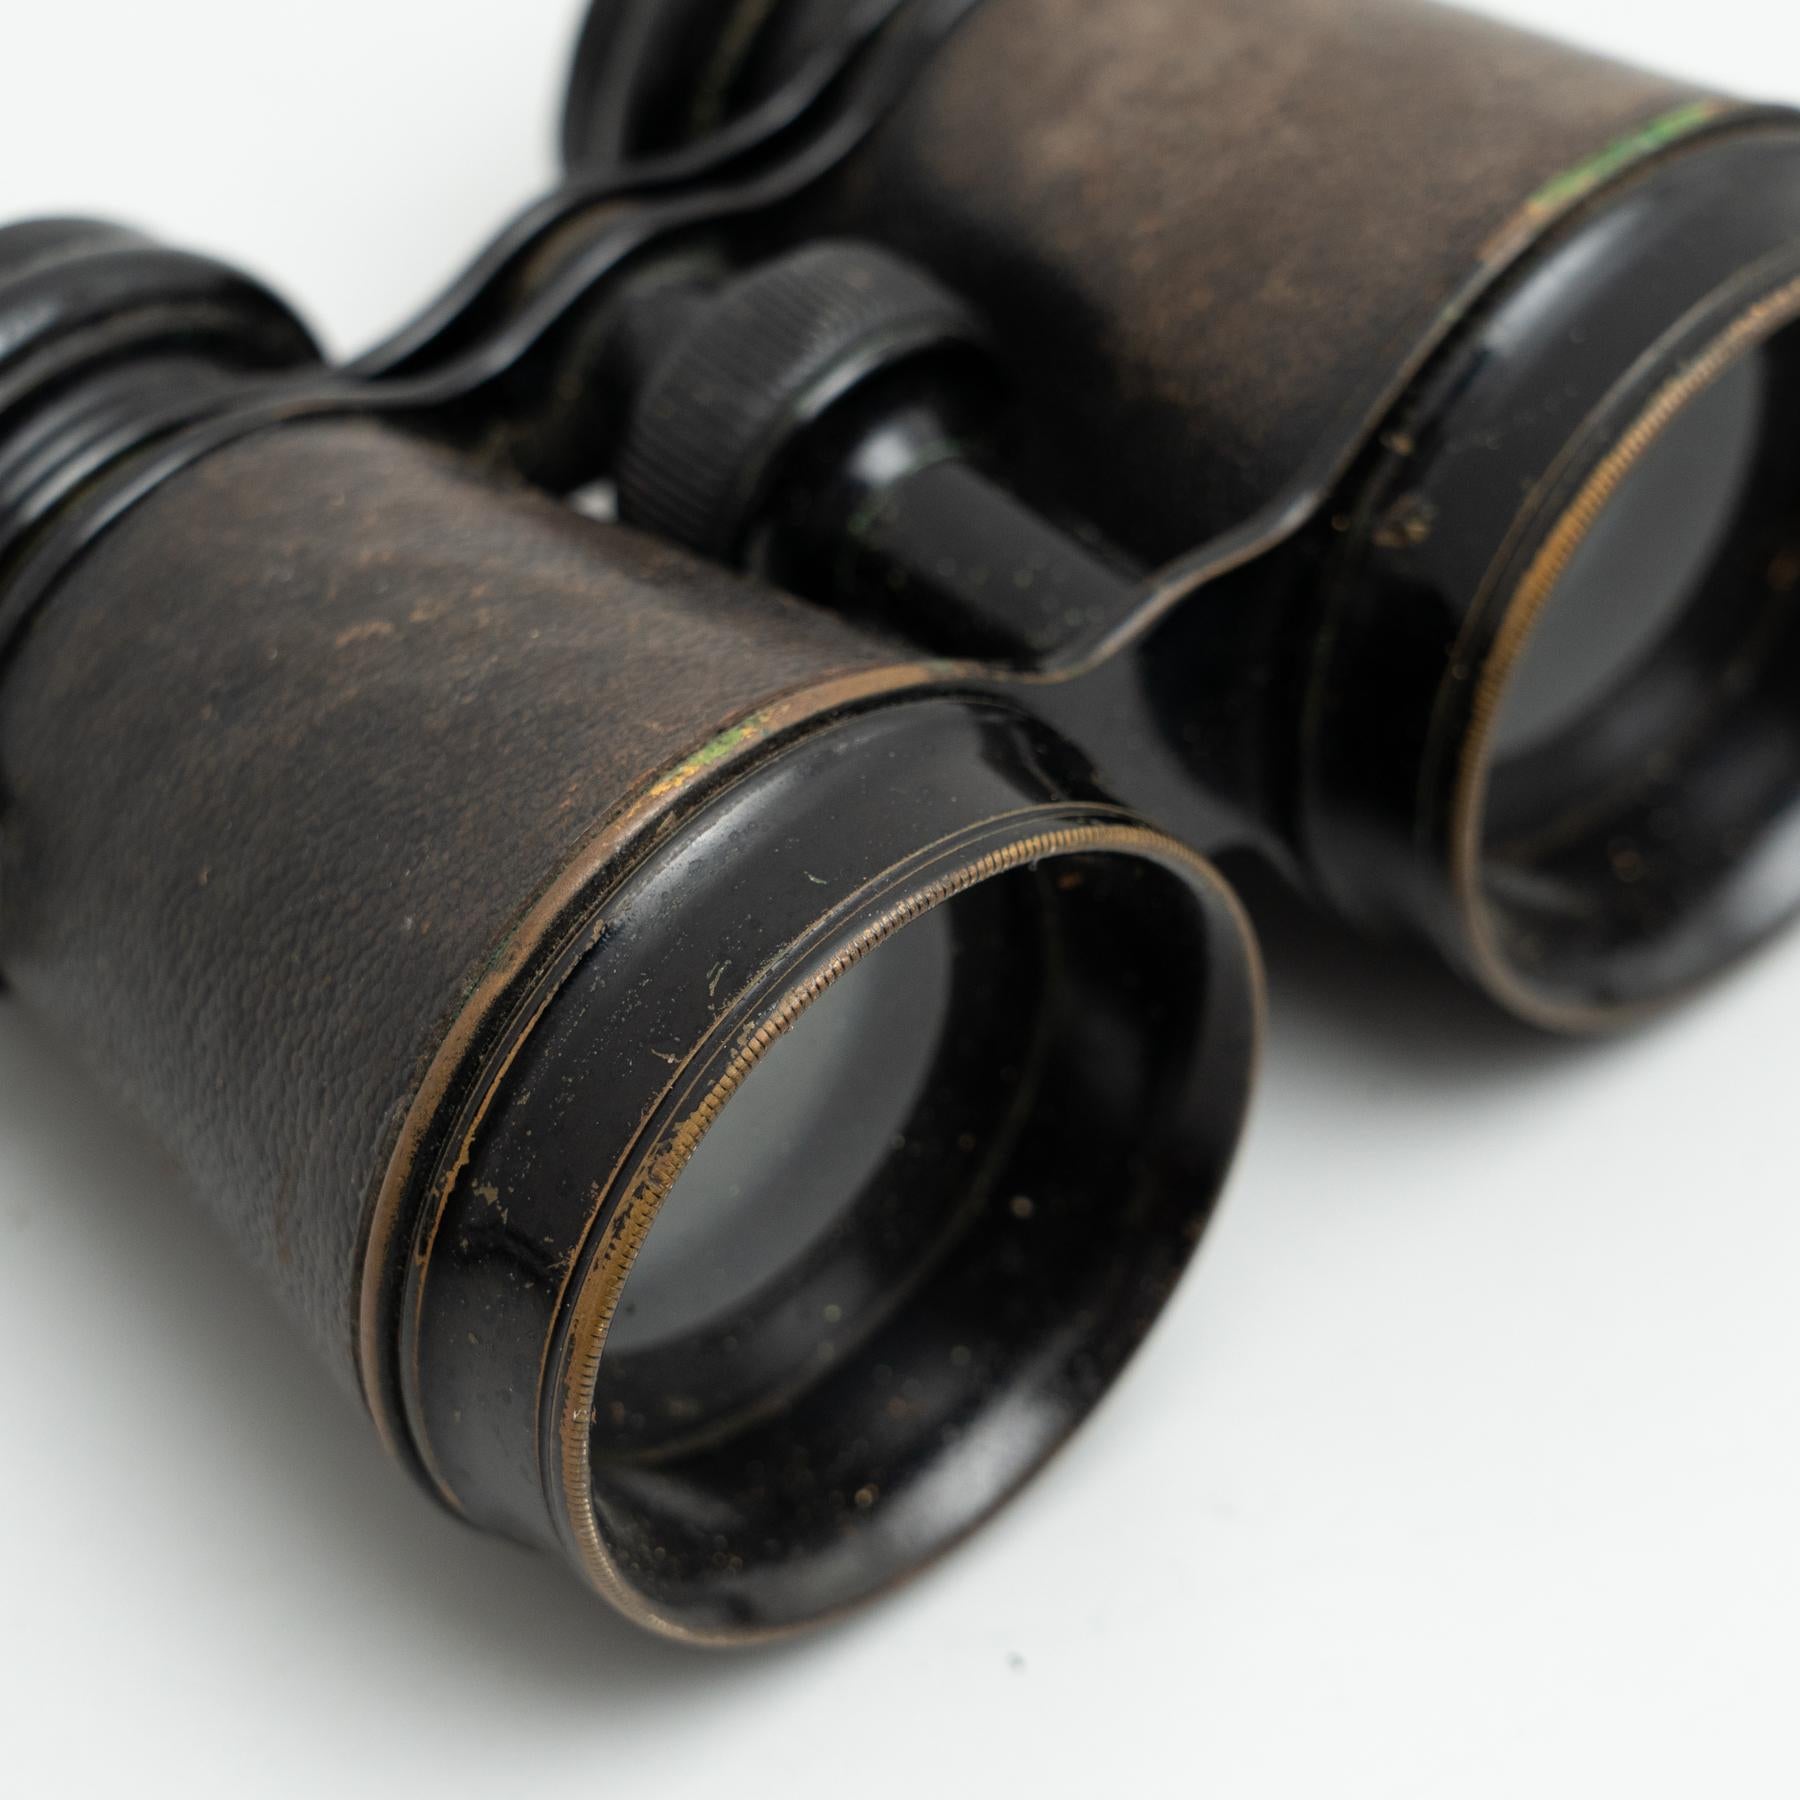 Antique Vintage Binoculars on a Leather Case, circa 1950 For Sale 1